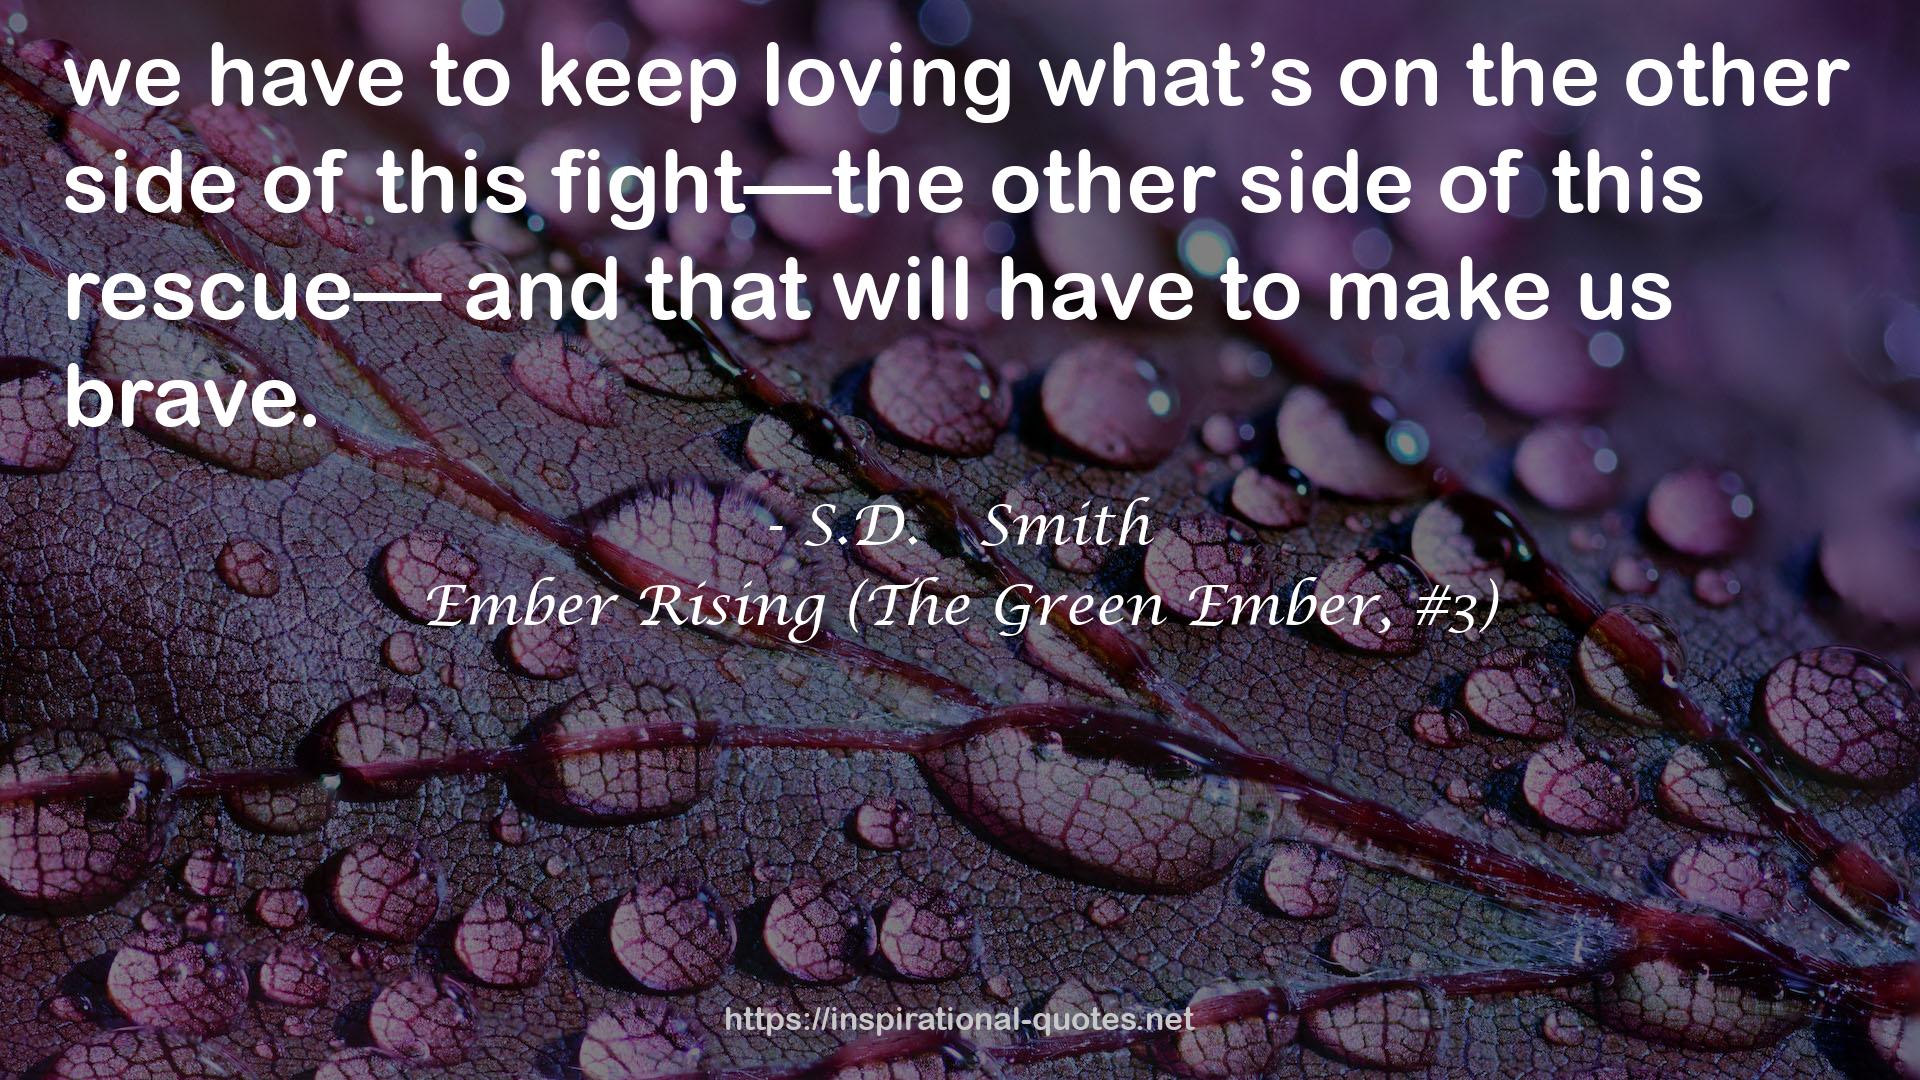 Ember Rising (The Green Ember, #3) QUOTES